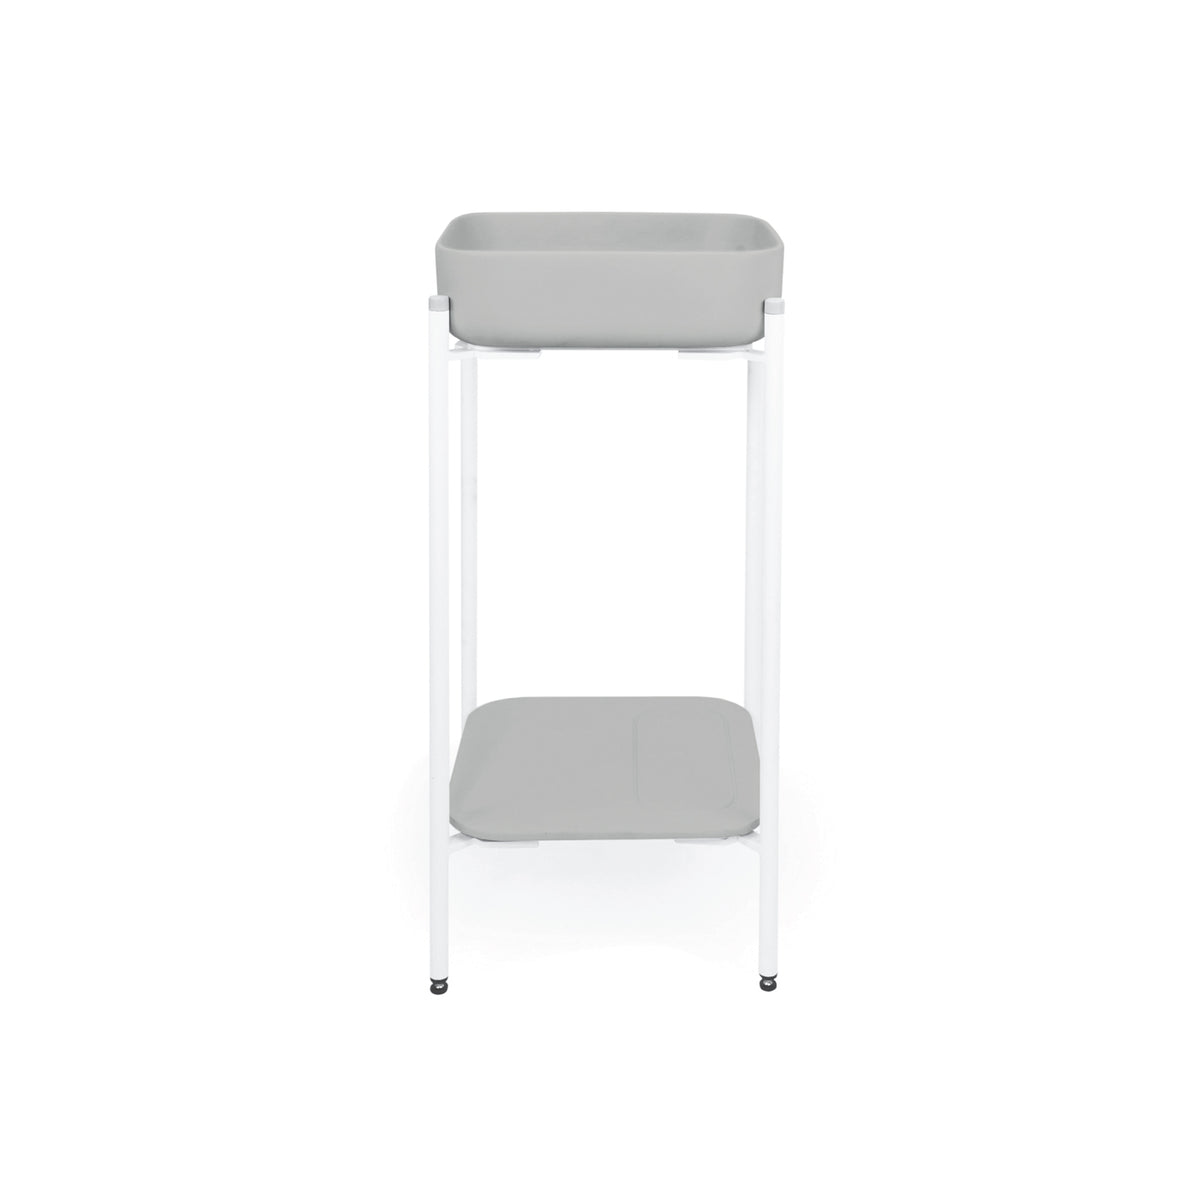 Cube Basin - Stand (Cloud,White Frame)